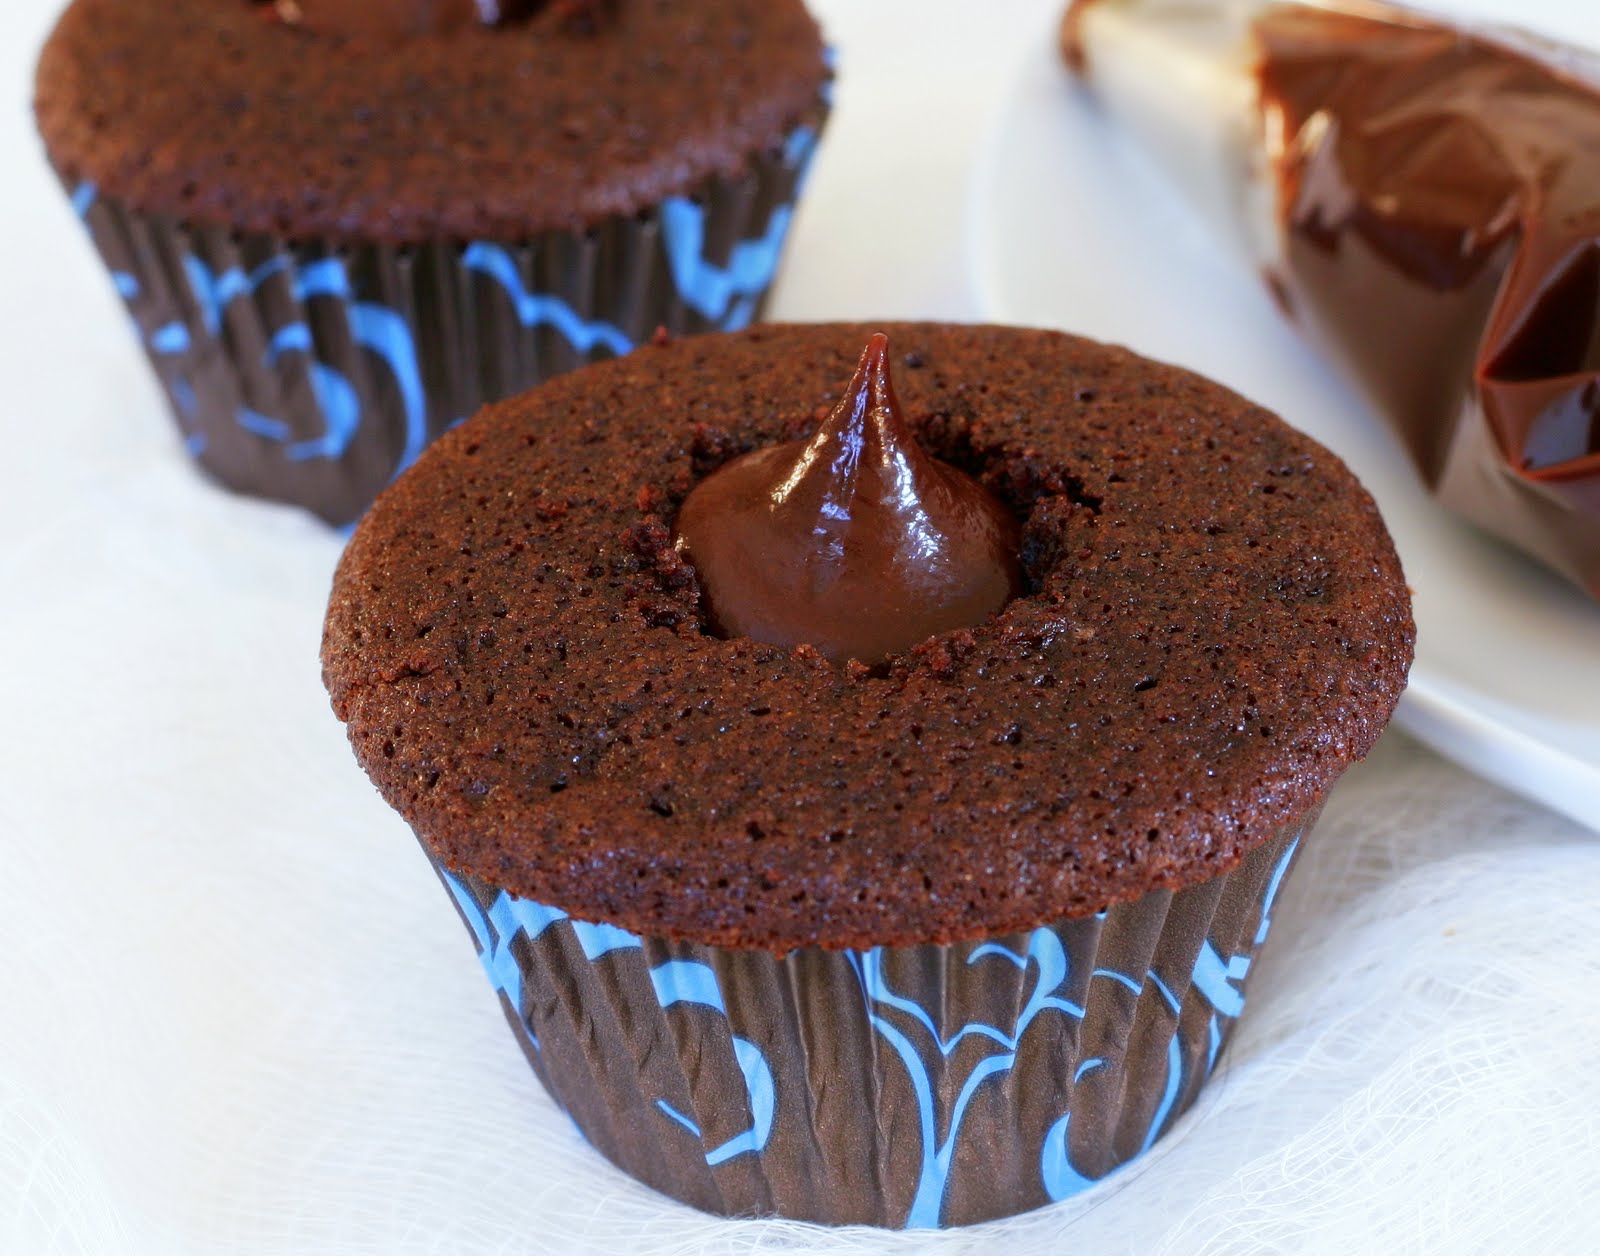 Tish Boyle Sweet Dreams: Double Chocolate Cupcakes with Peanut Butter ...